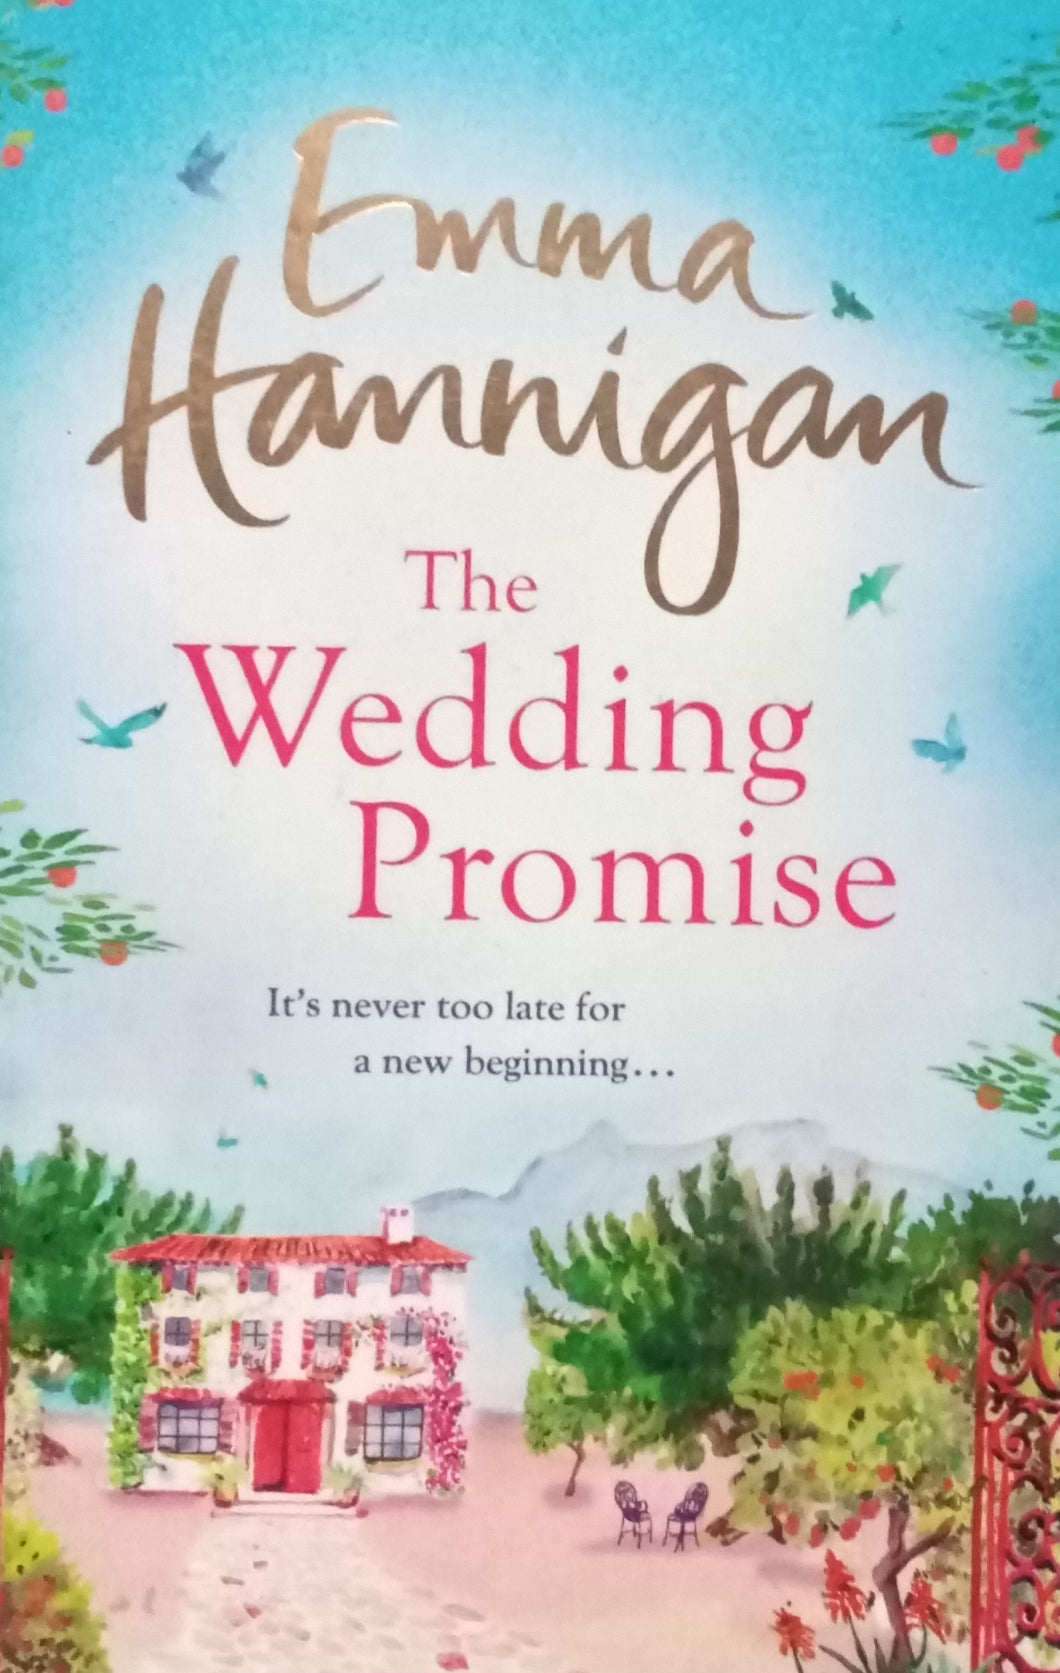 The Wedding Promise by Emma Hannigan